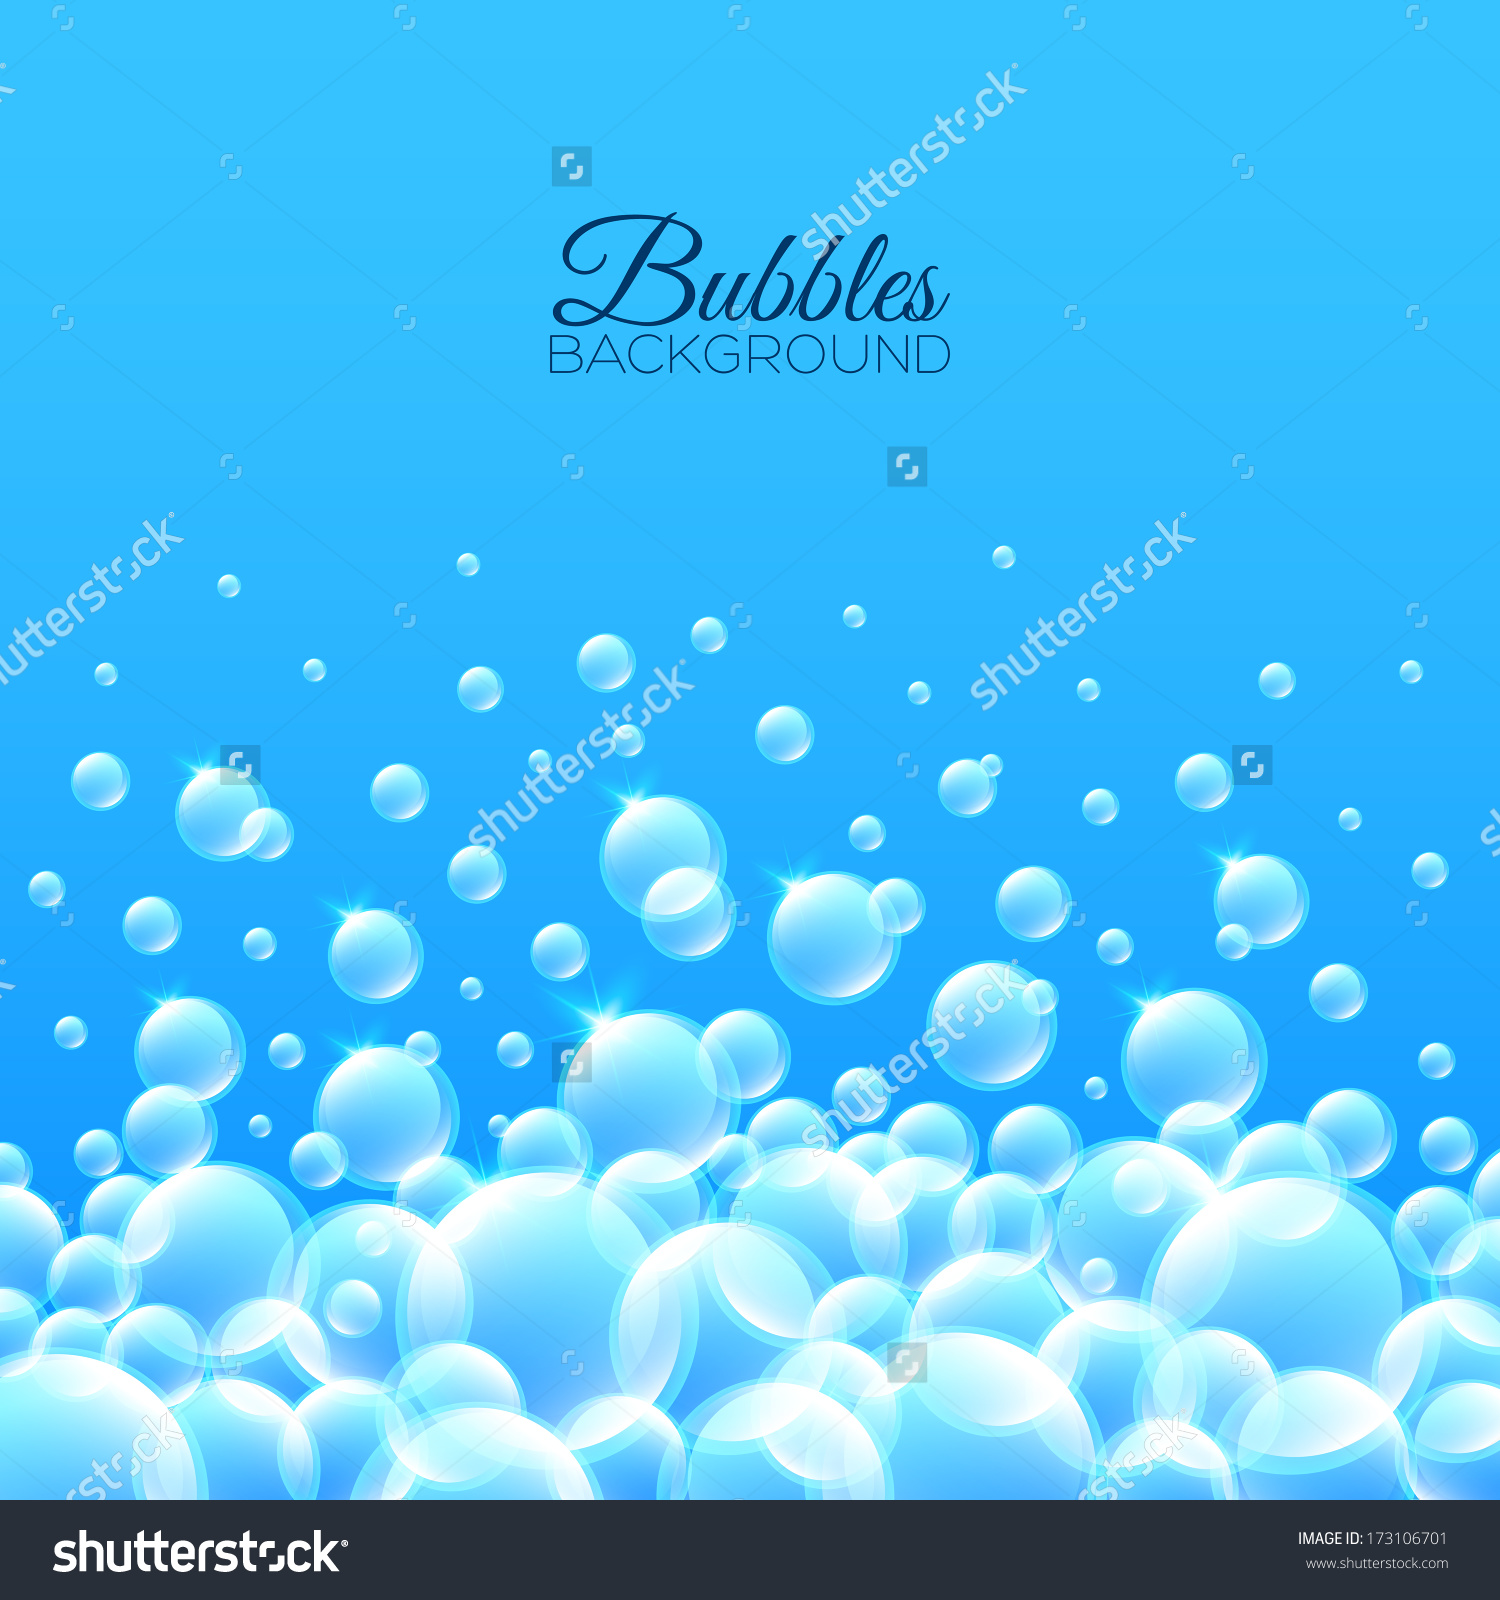 Floating Bubbles Beautiful Vector Background For Your Design 1500x1600